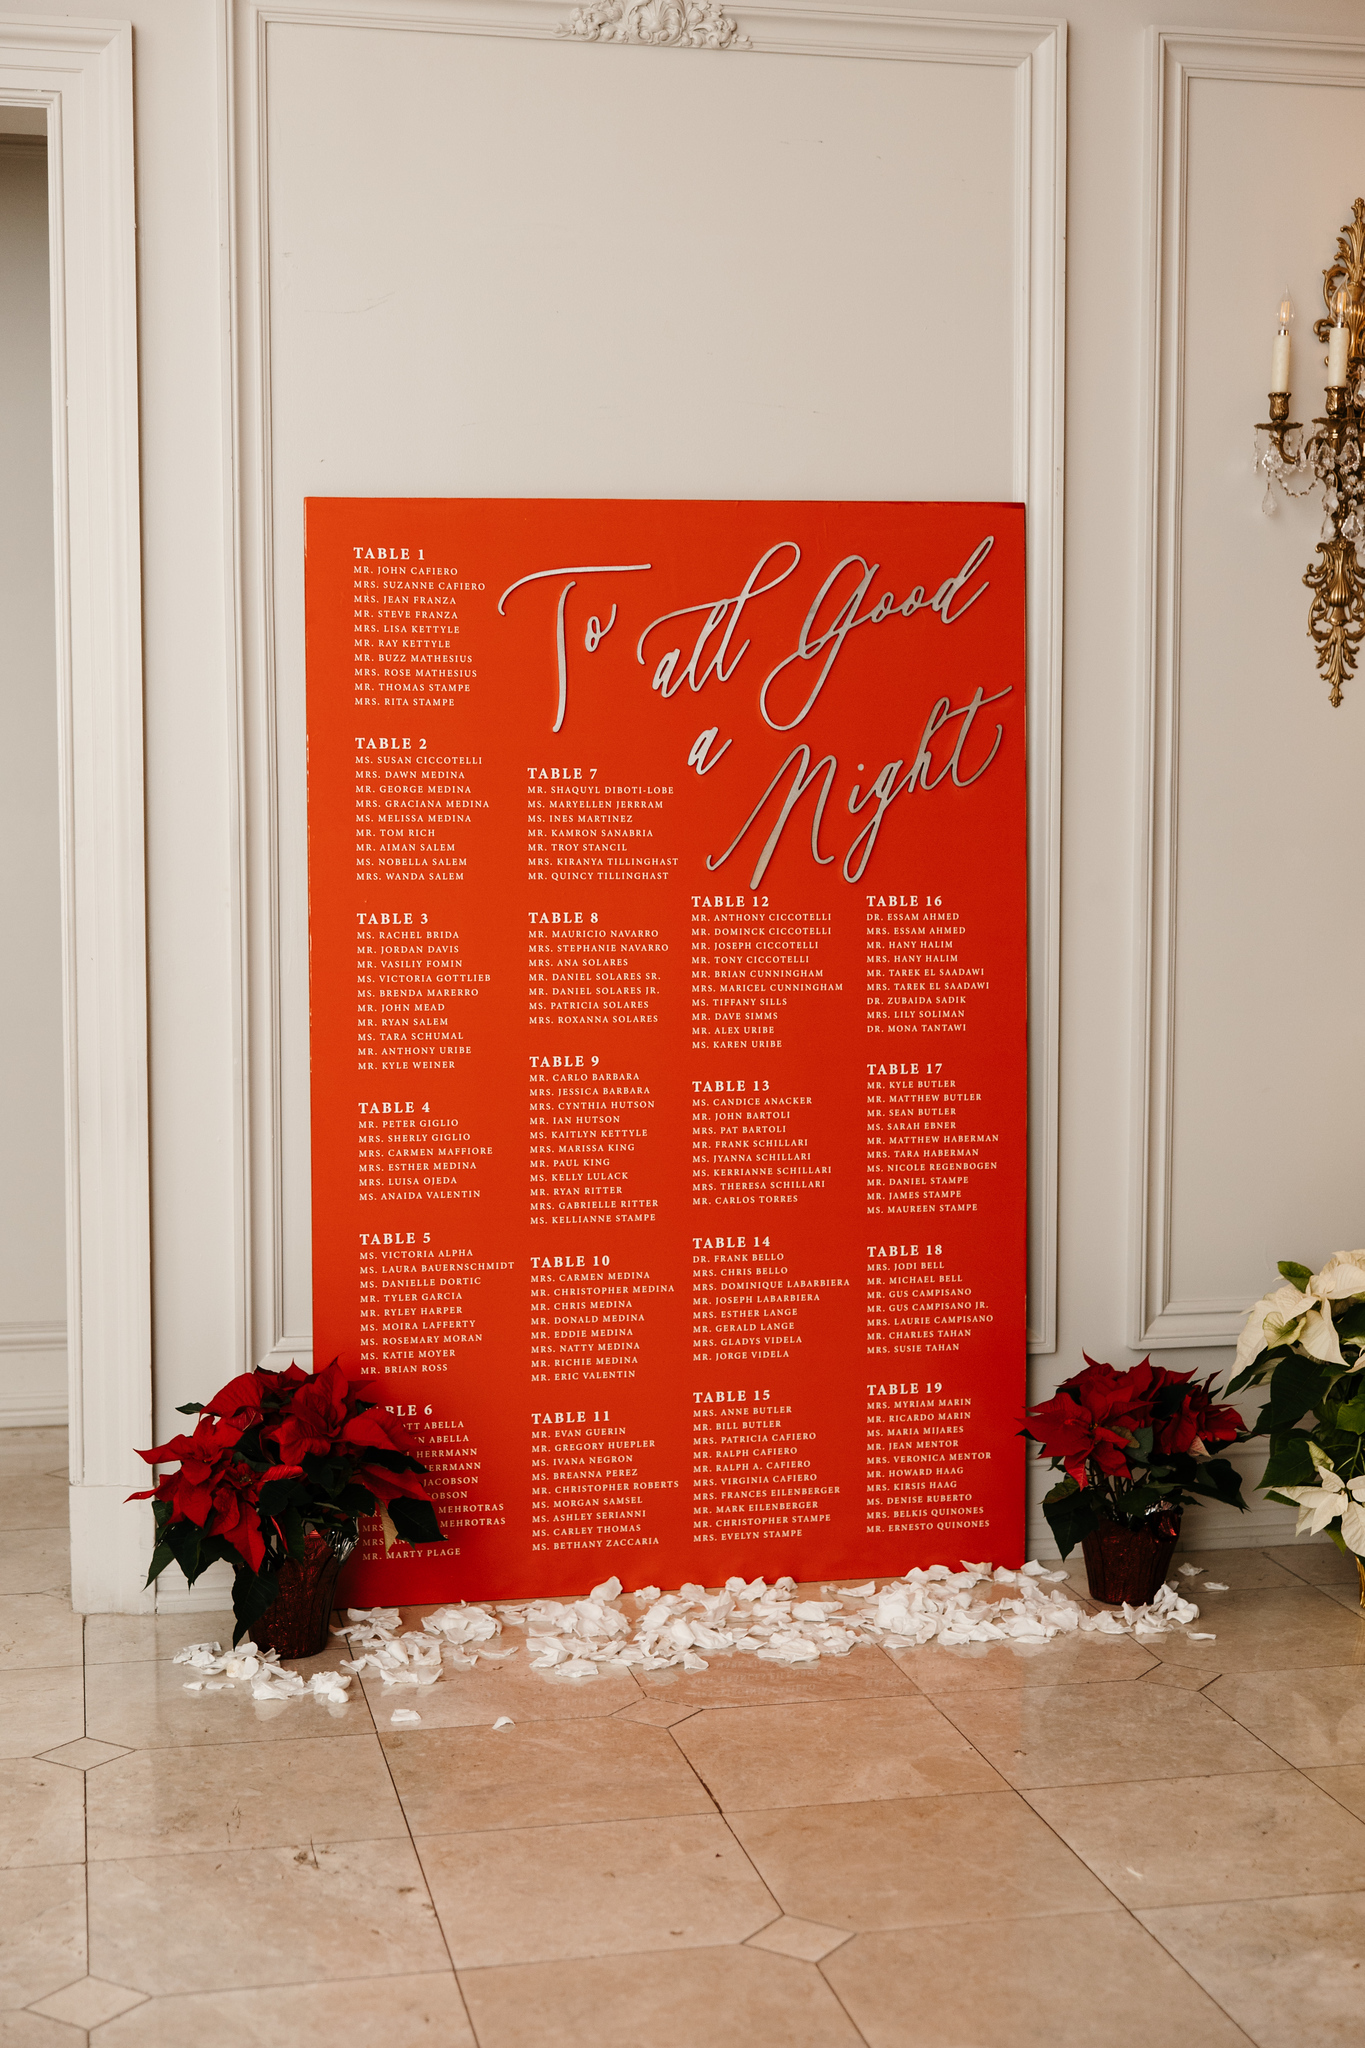 This Christmas-themed seating chart is a fun wedding idea for a December wedding.